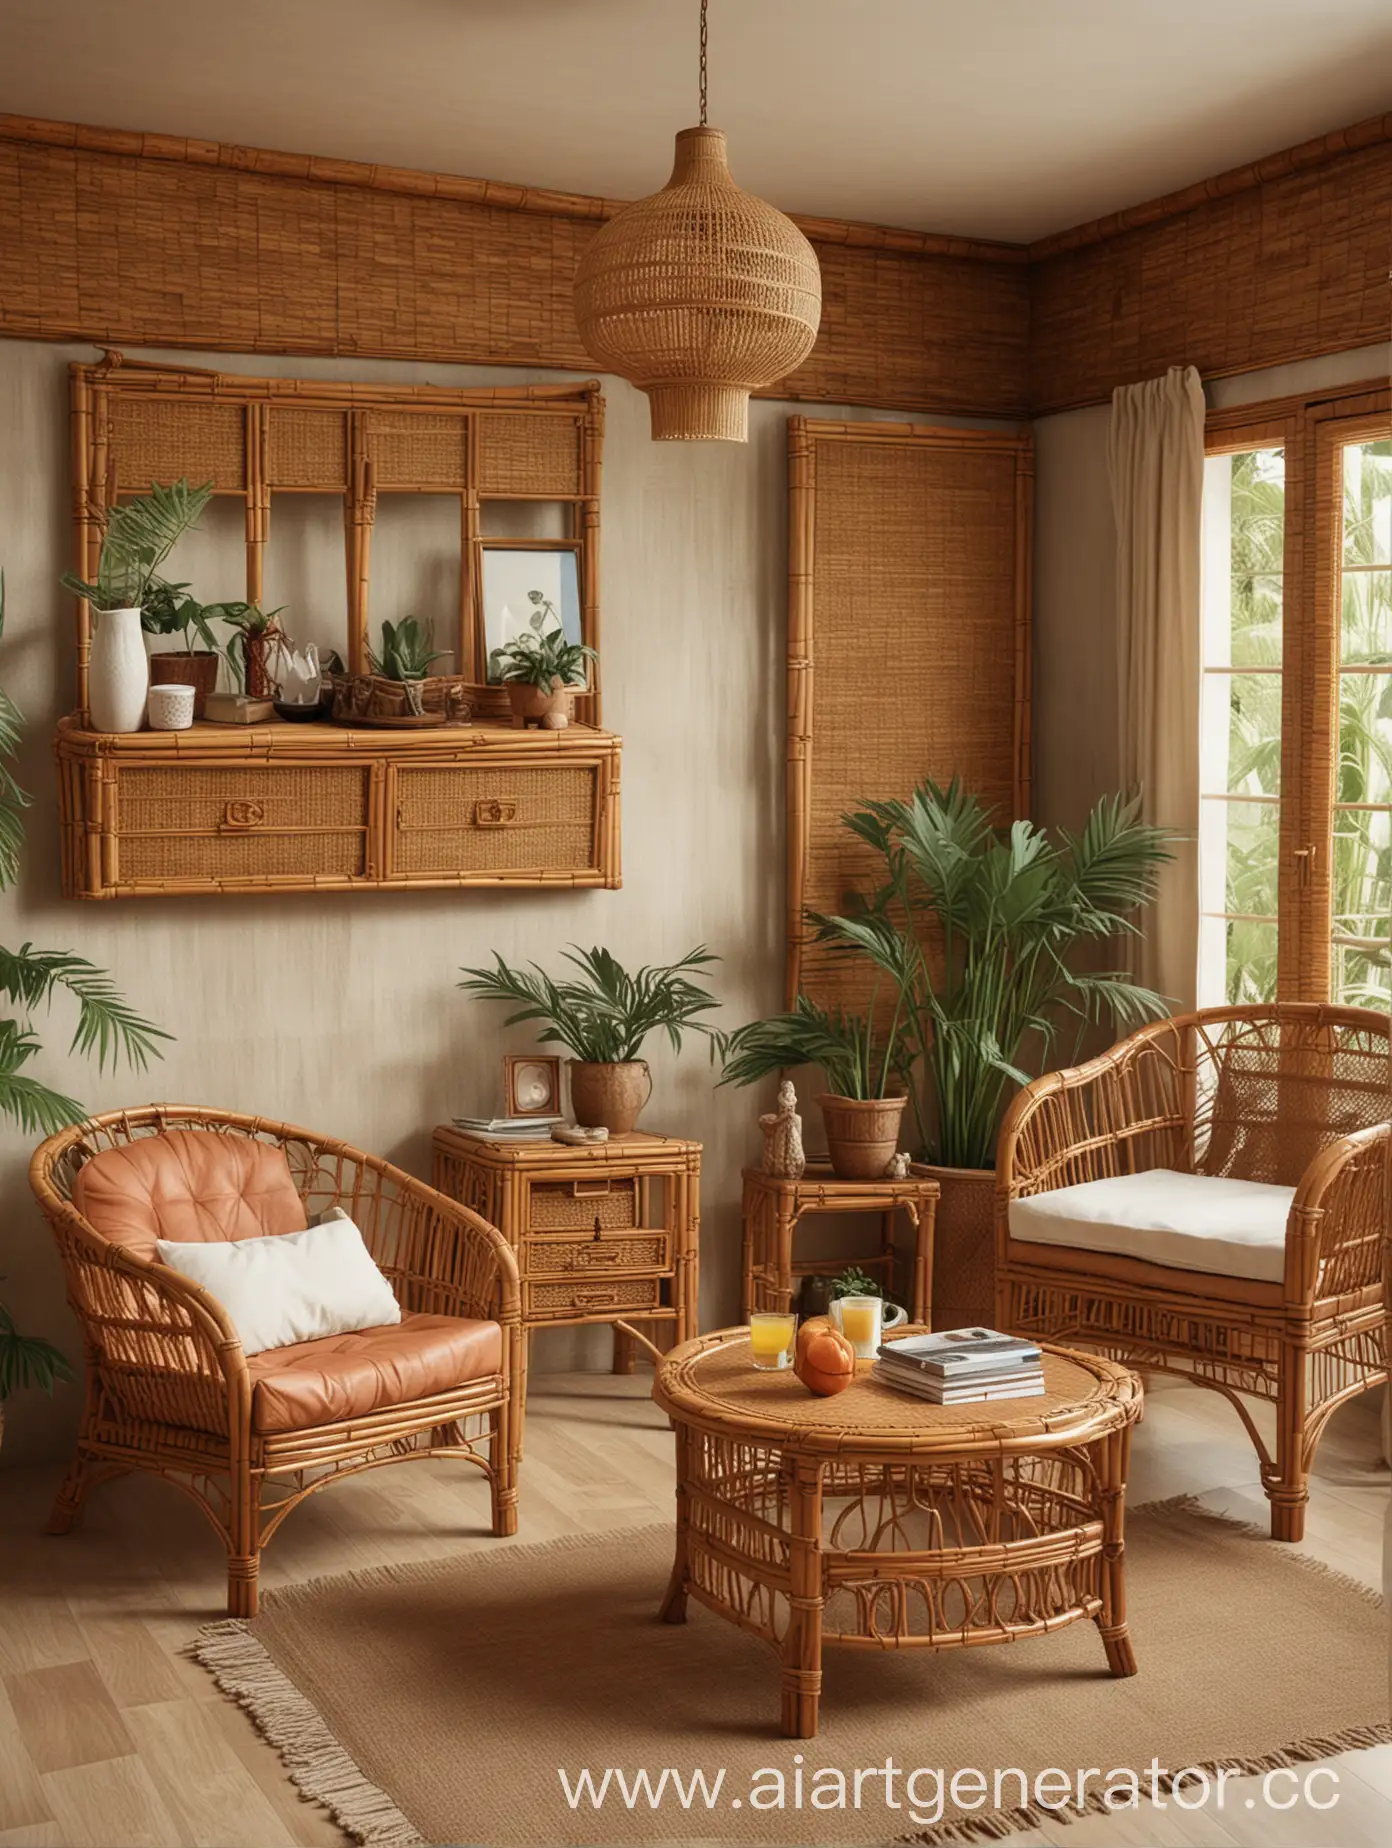 Vintage-Home-Decor-with-Rattan-and-Bamboo-Furniture-1980s-Photorealistic-Interior-Design